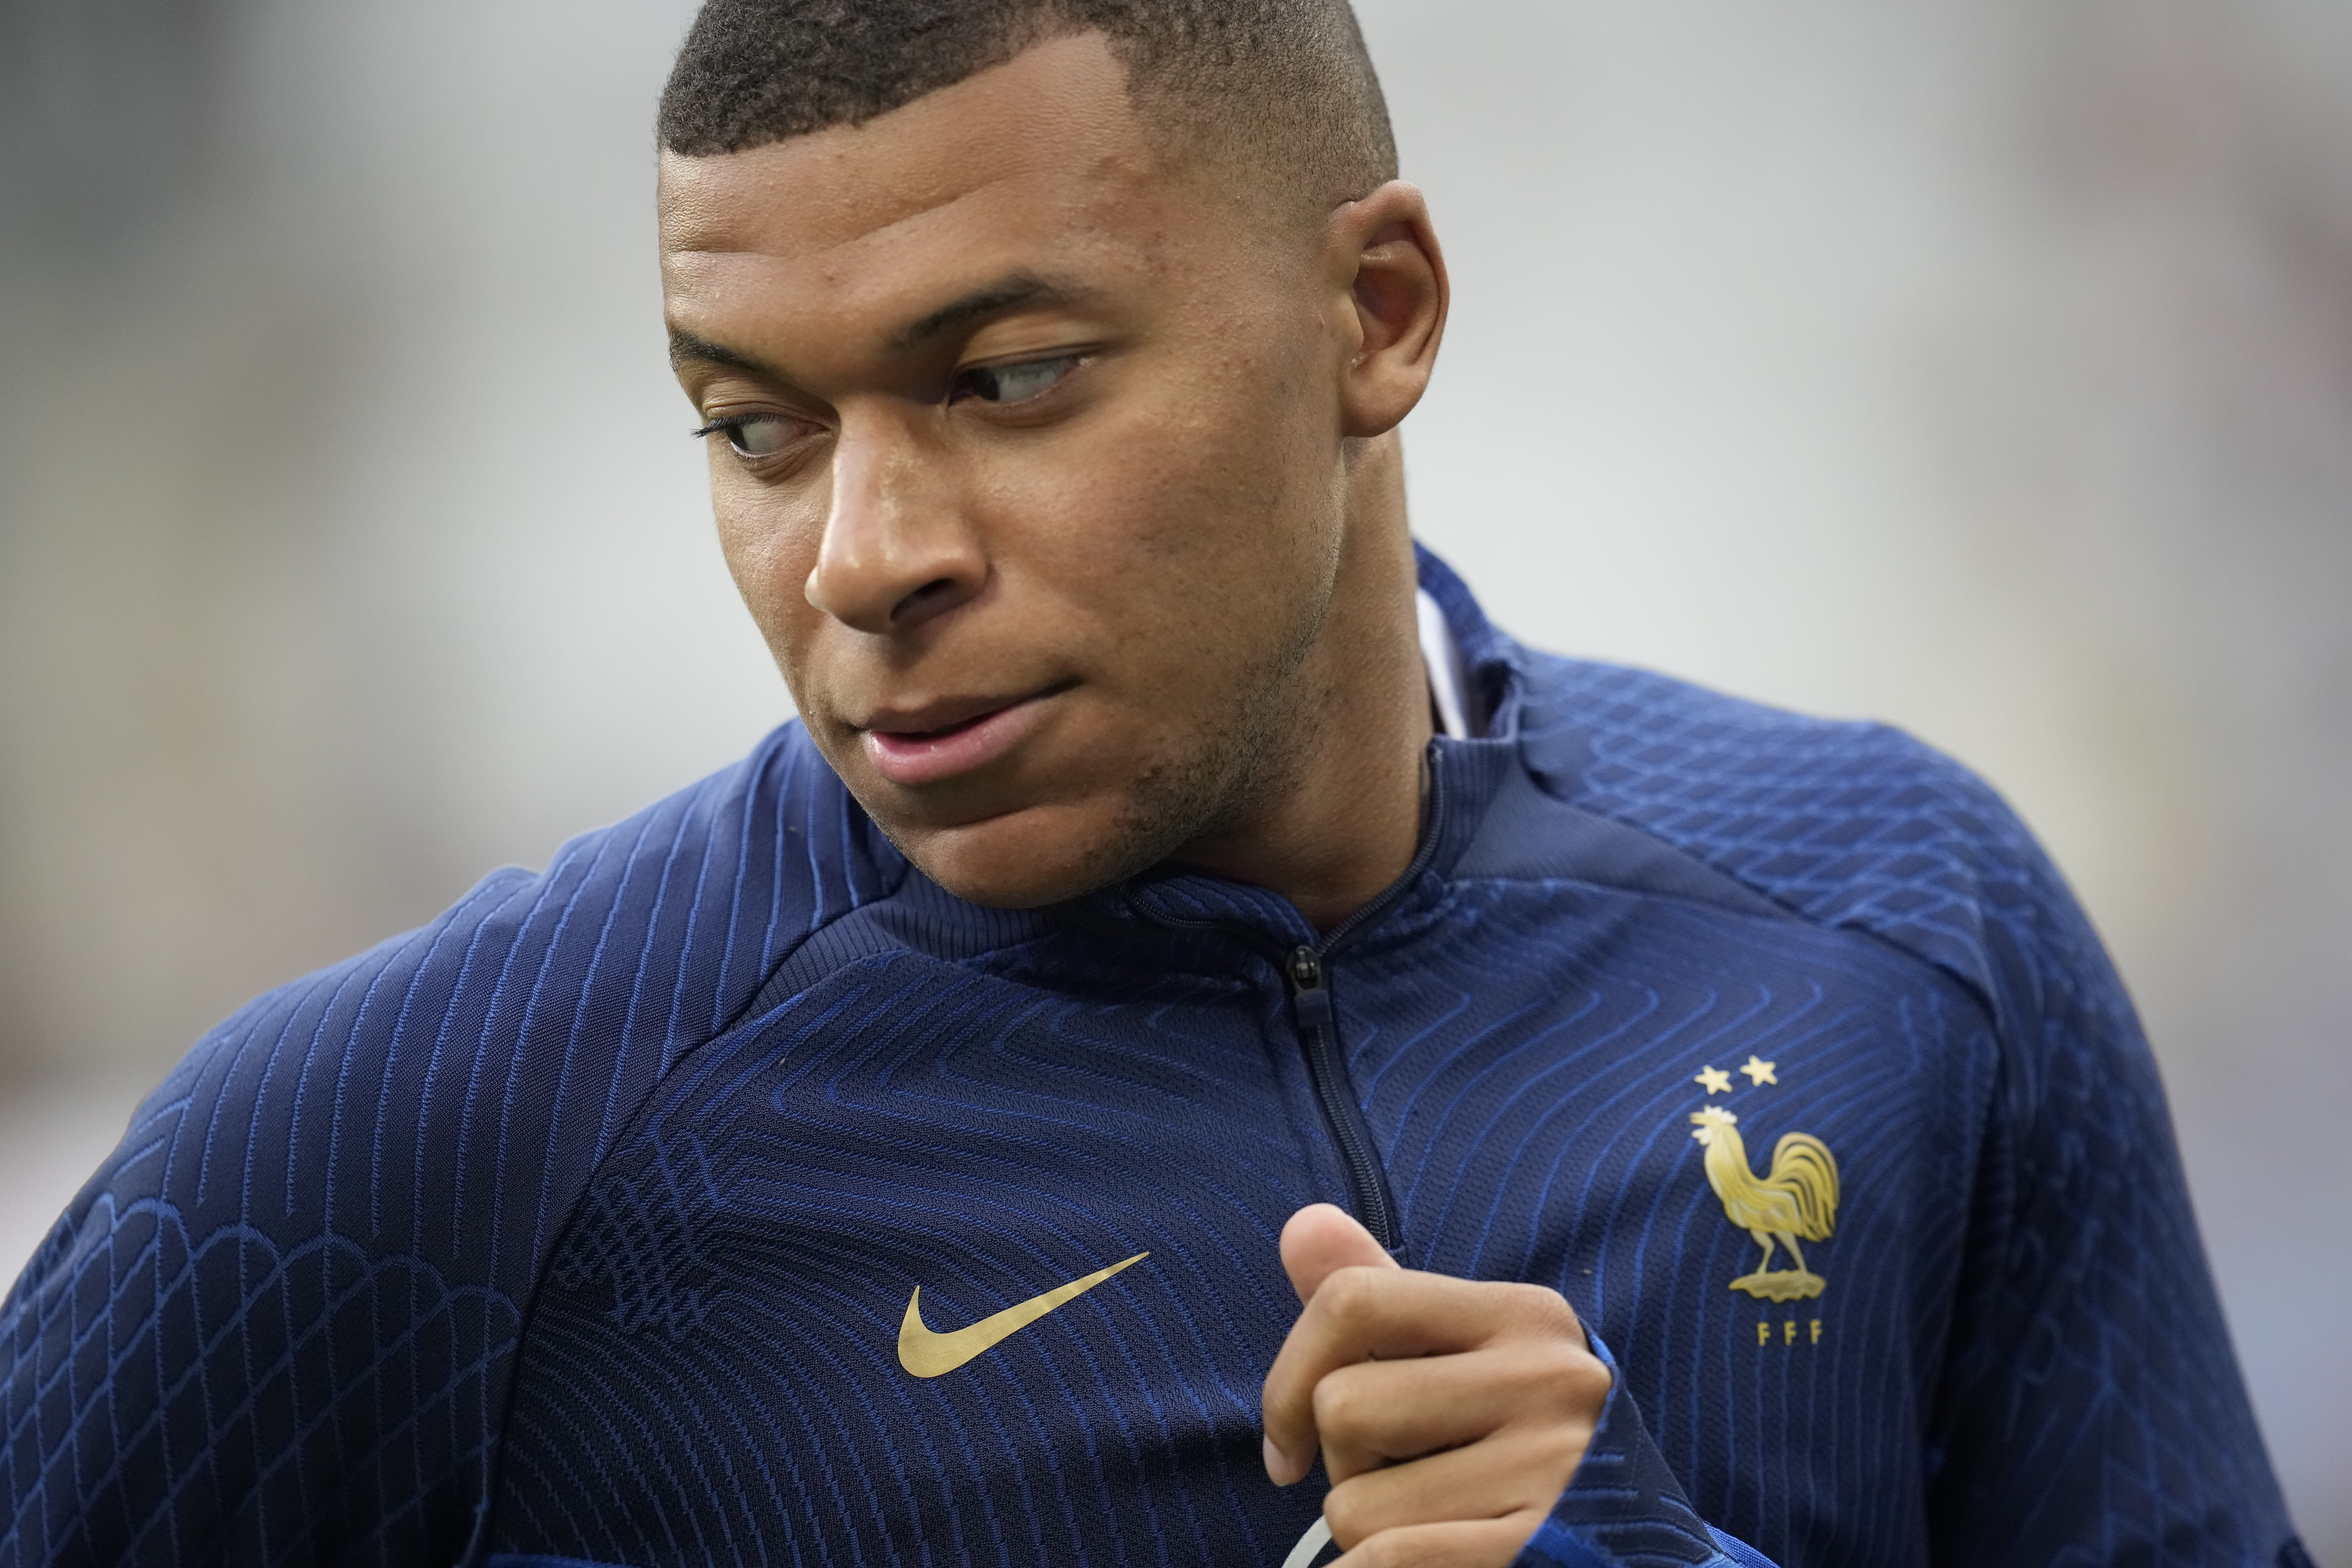 Kylian Mbappé returns to PSG first-team training squad after 'positive discussions'